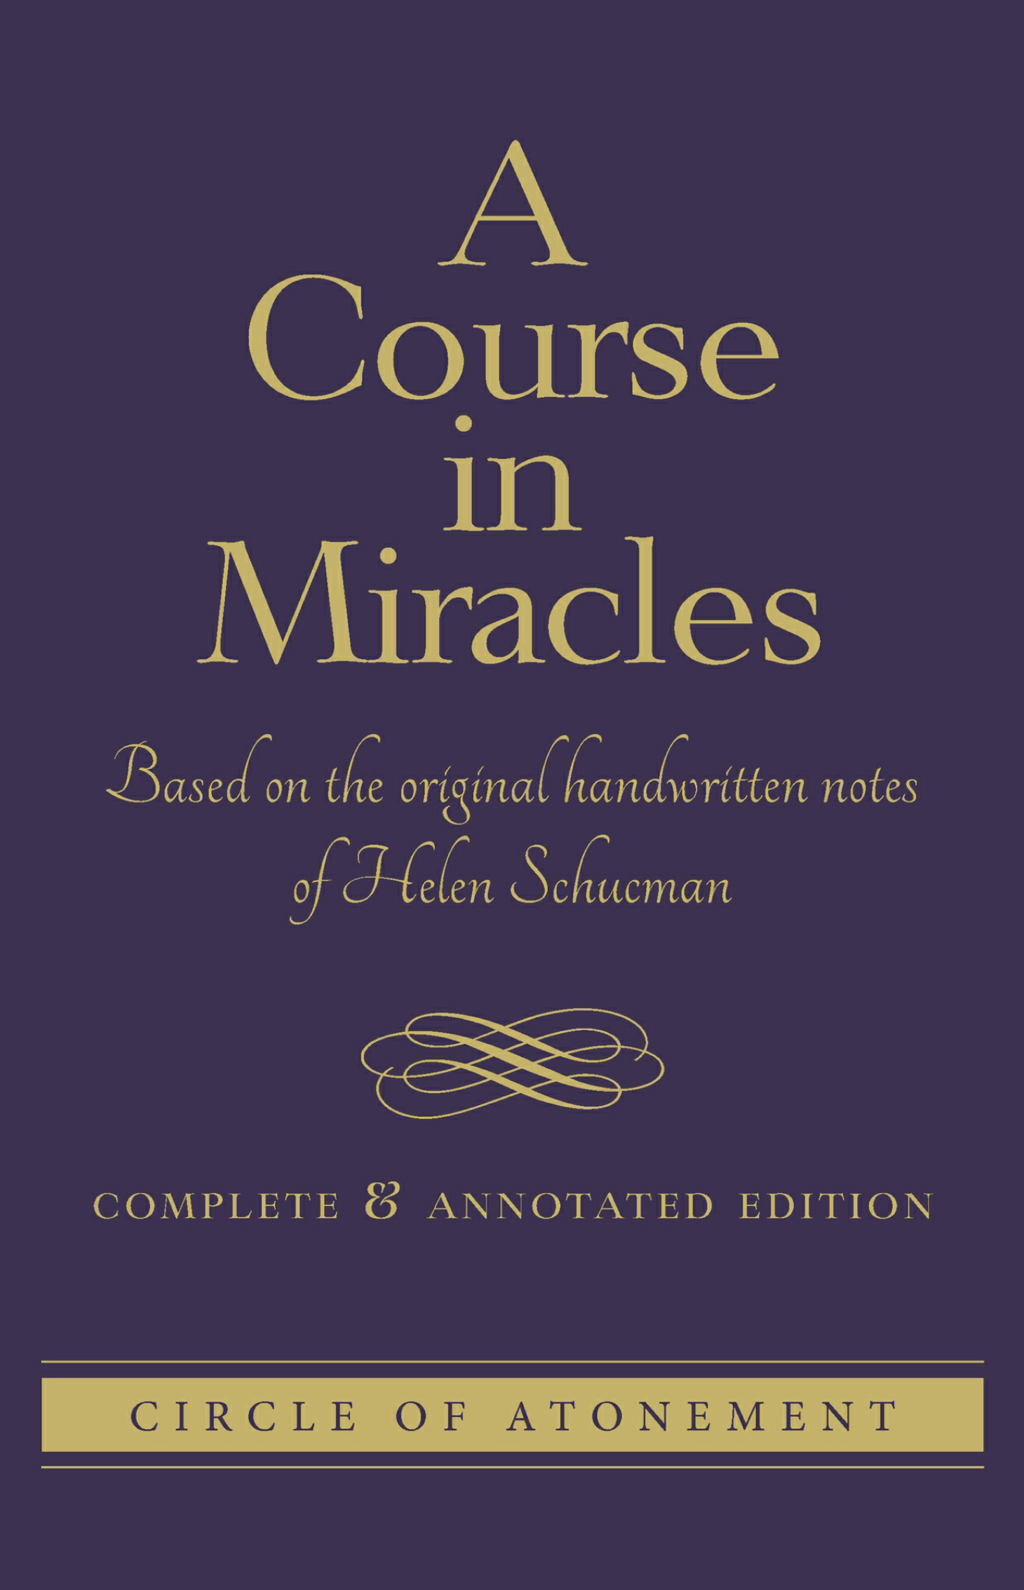 Image of A Course In Miracles, Complete and Annotated Edition (CE) book cover